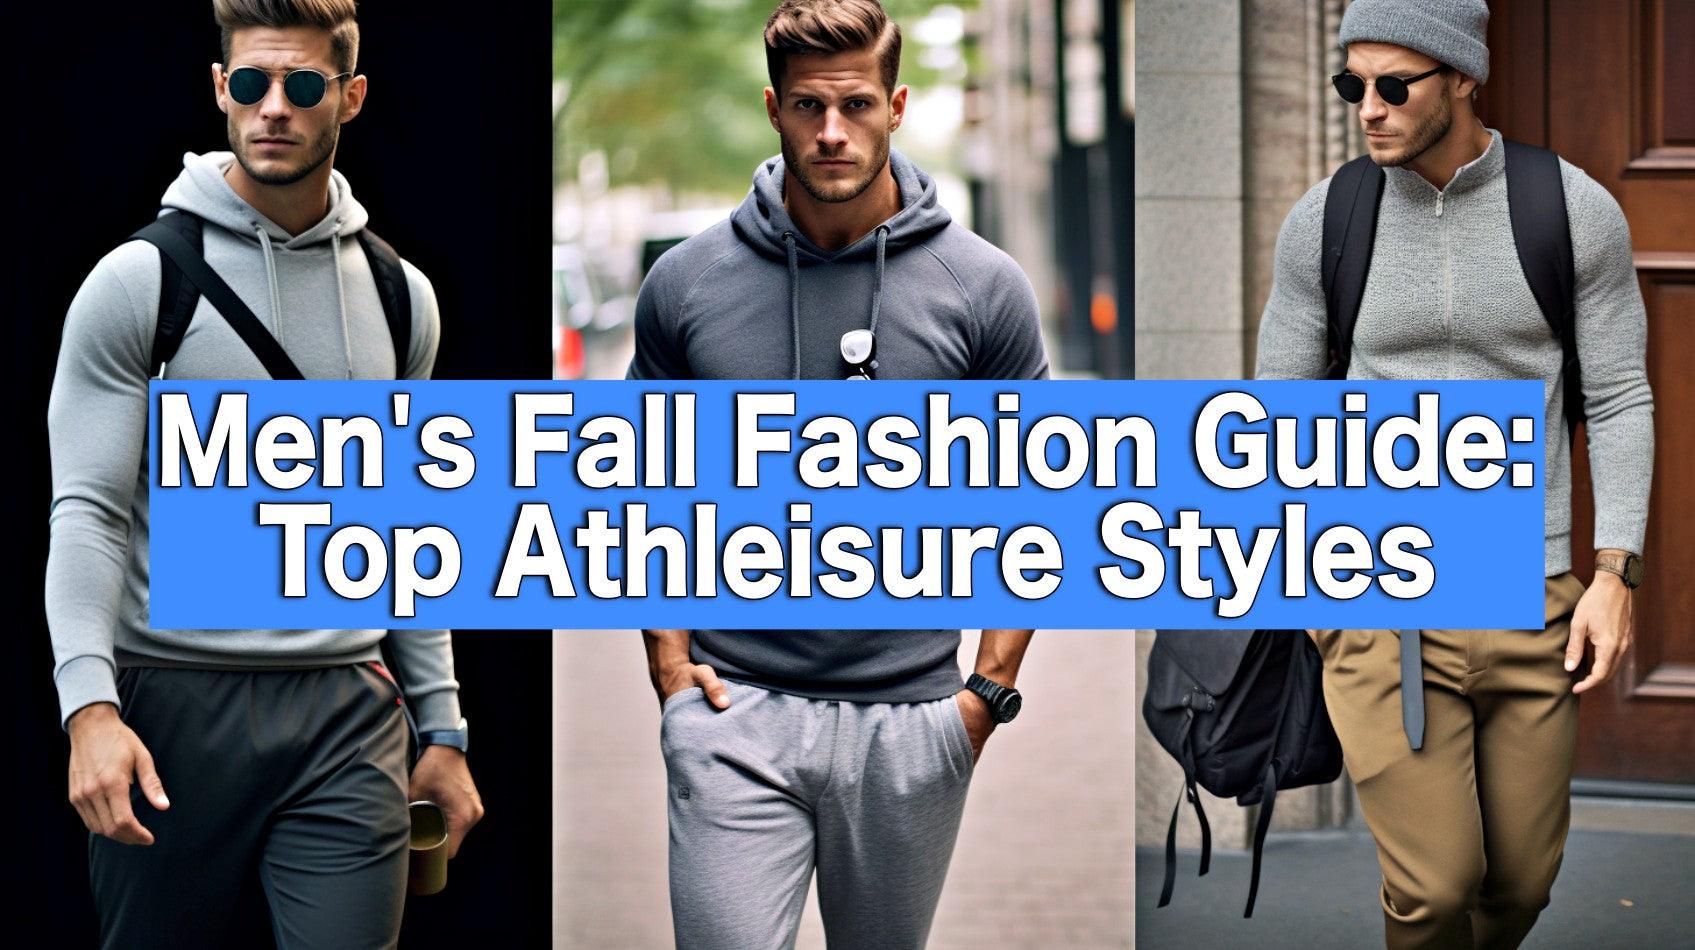 Men's Fall Fashion: The Ultimate Guide to Workout Clothes